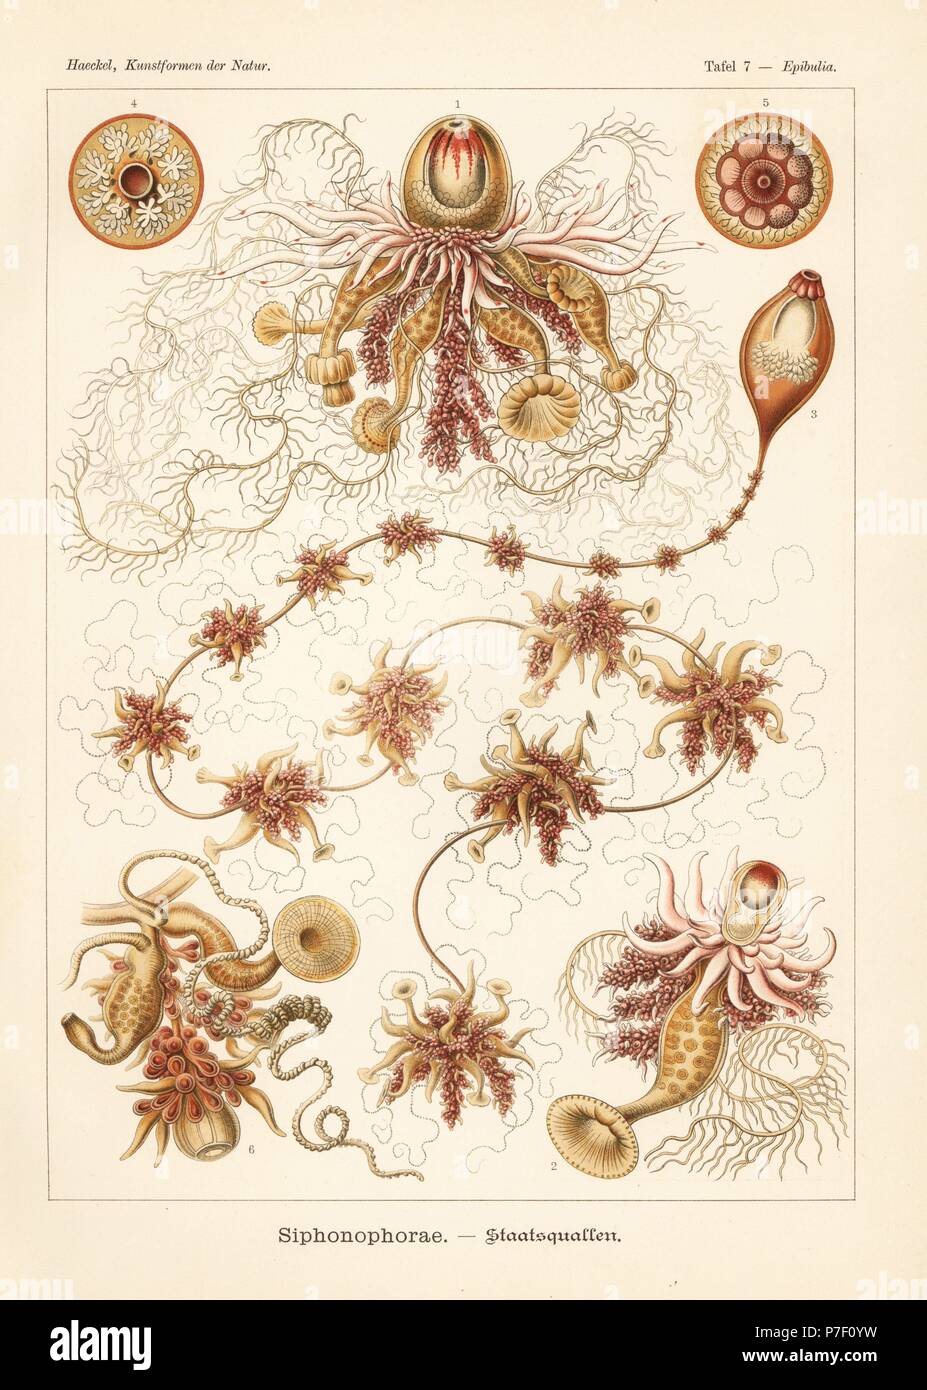 Siphonophorae hydrozoa: Epibulia ritteriana 1,2, and Salacella uvaria 3-6. Chromolithograph by Adolf Glitsch from an illustration by Ernst Haeckel from Art Forms in Nature, Kunstformen der Natur, Liepzig, Germany, 1904. Stock Photo